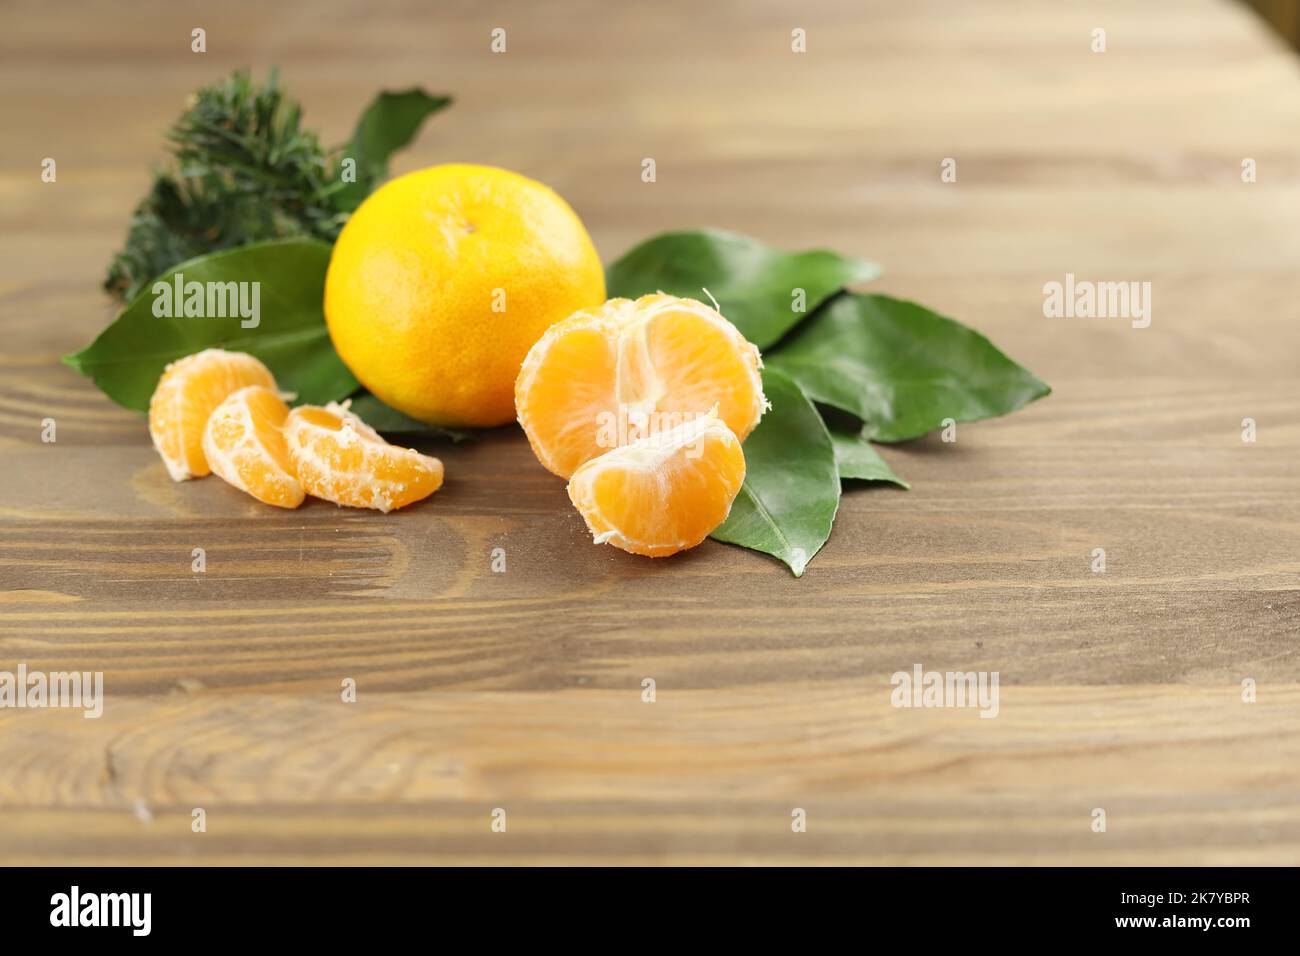 Mandarin or tangerine fruits whole and sliced, green leaves , fir tree on wooden background Stock Photo